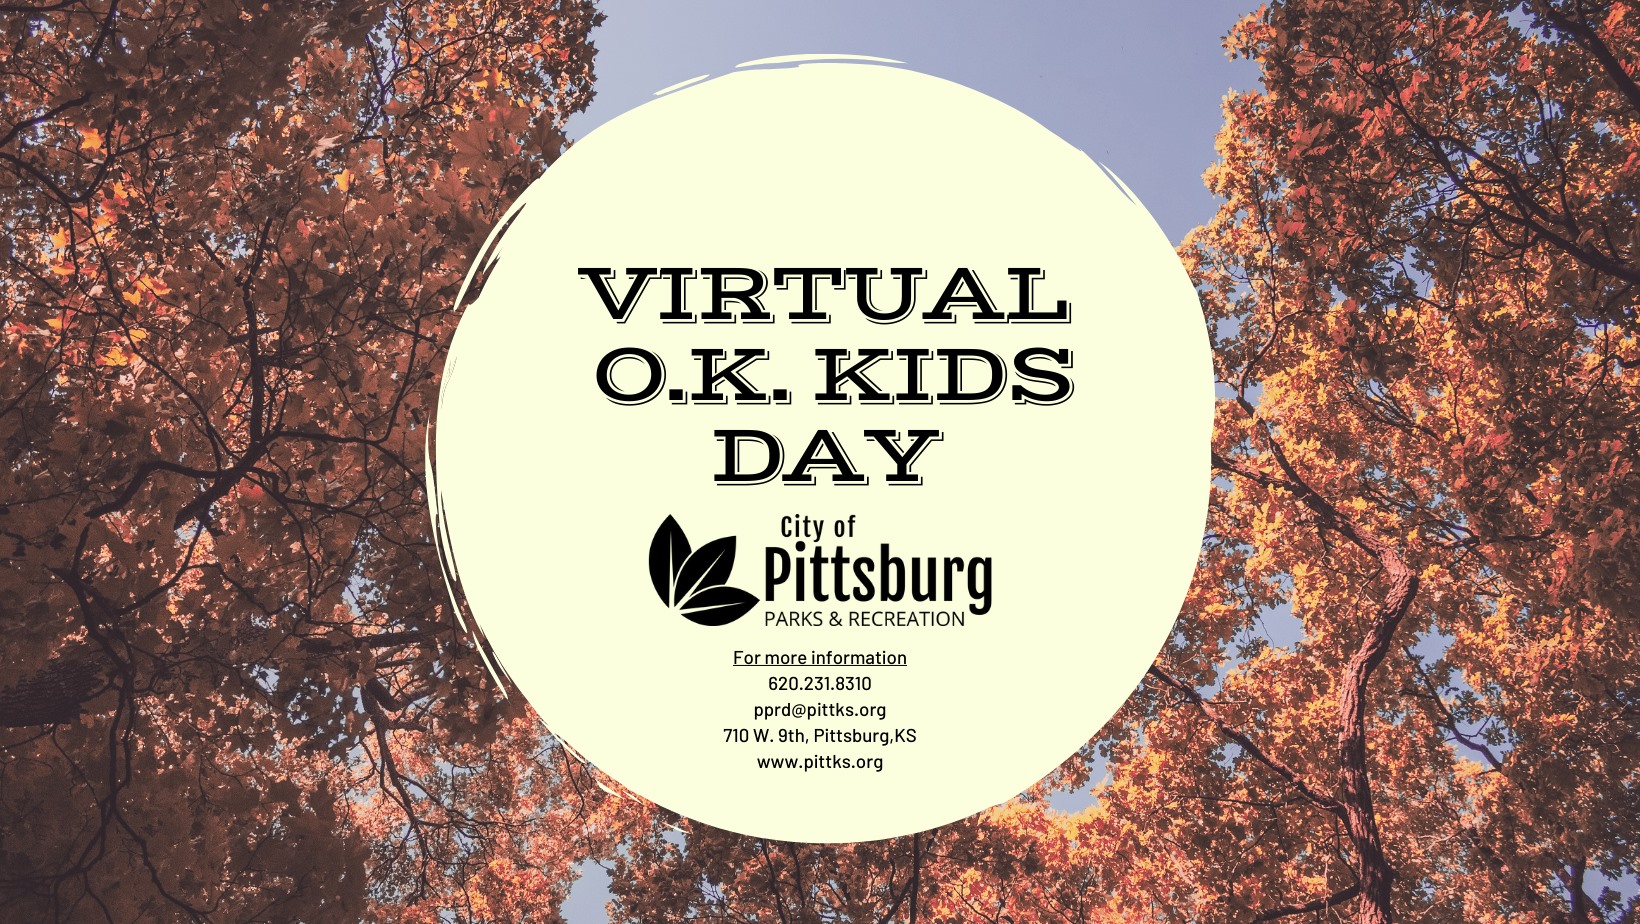 Pittsburg Parks & Recreation Department to host virtual O.K. Kids Day events